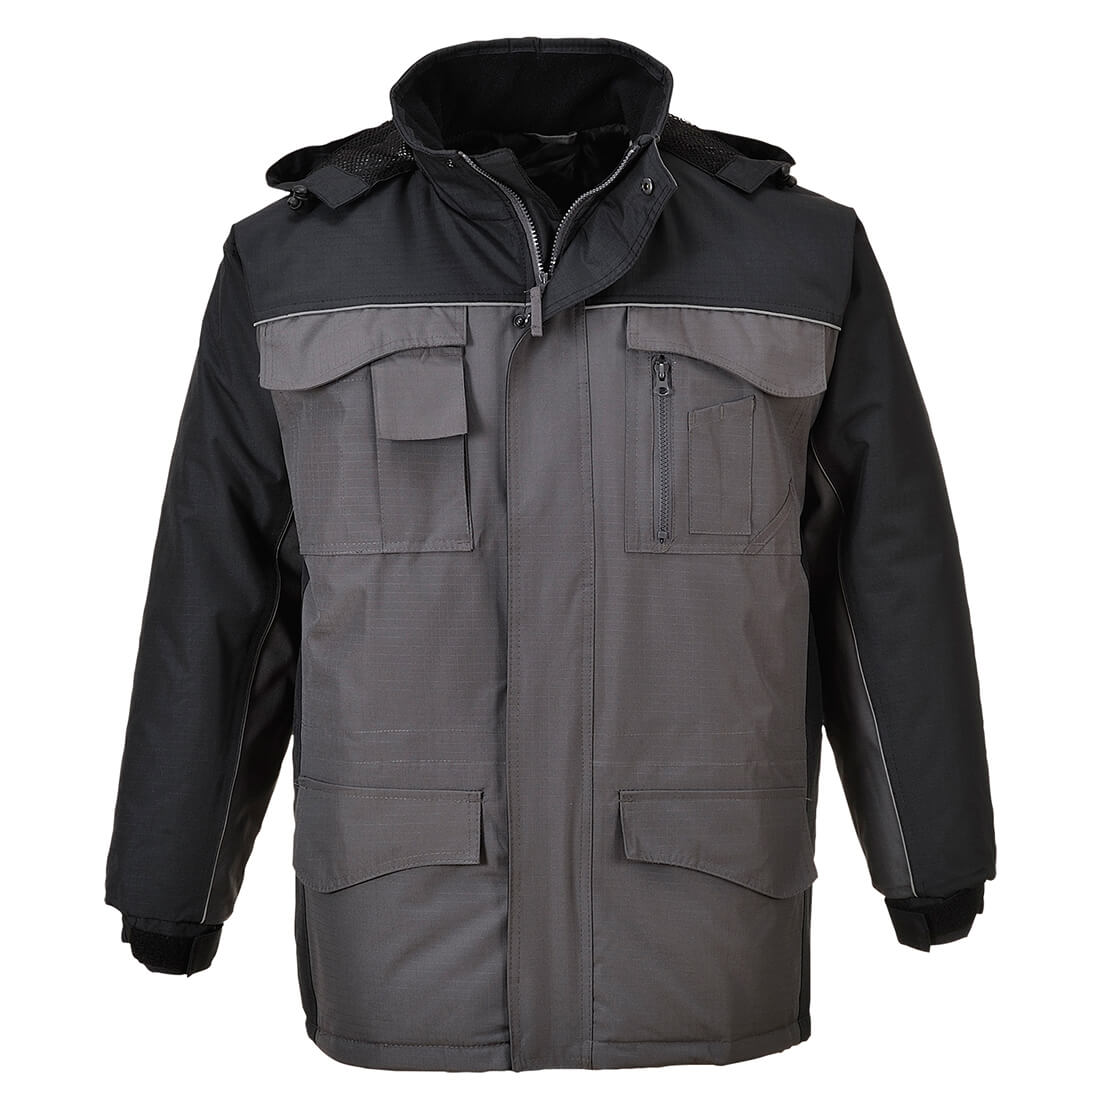 RS Parka | Phelps PPE